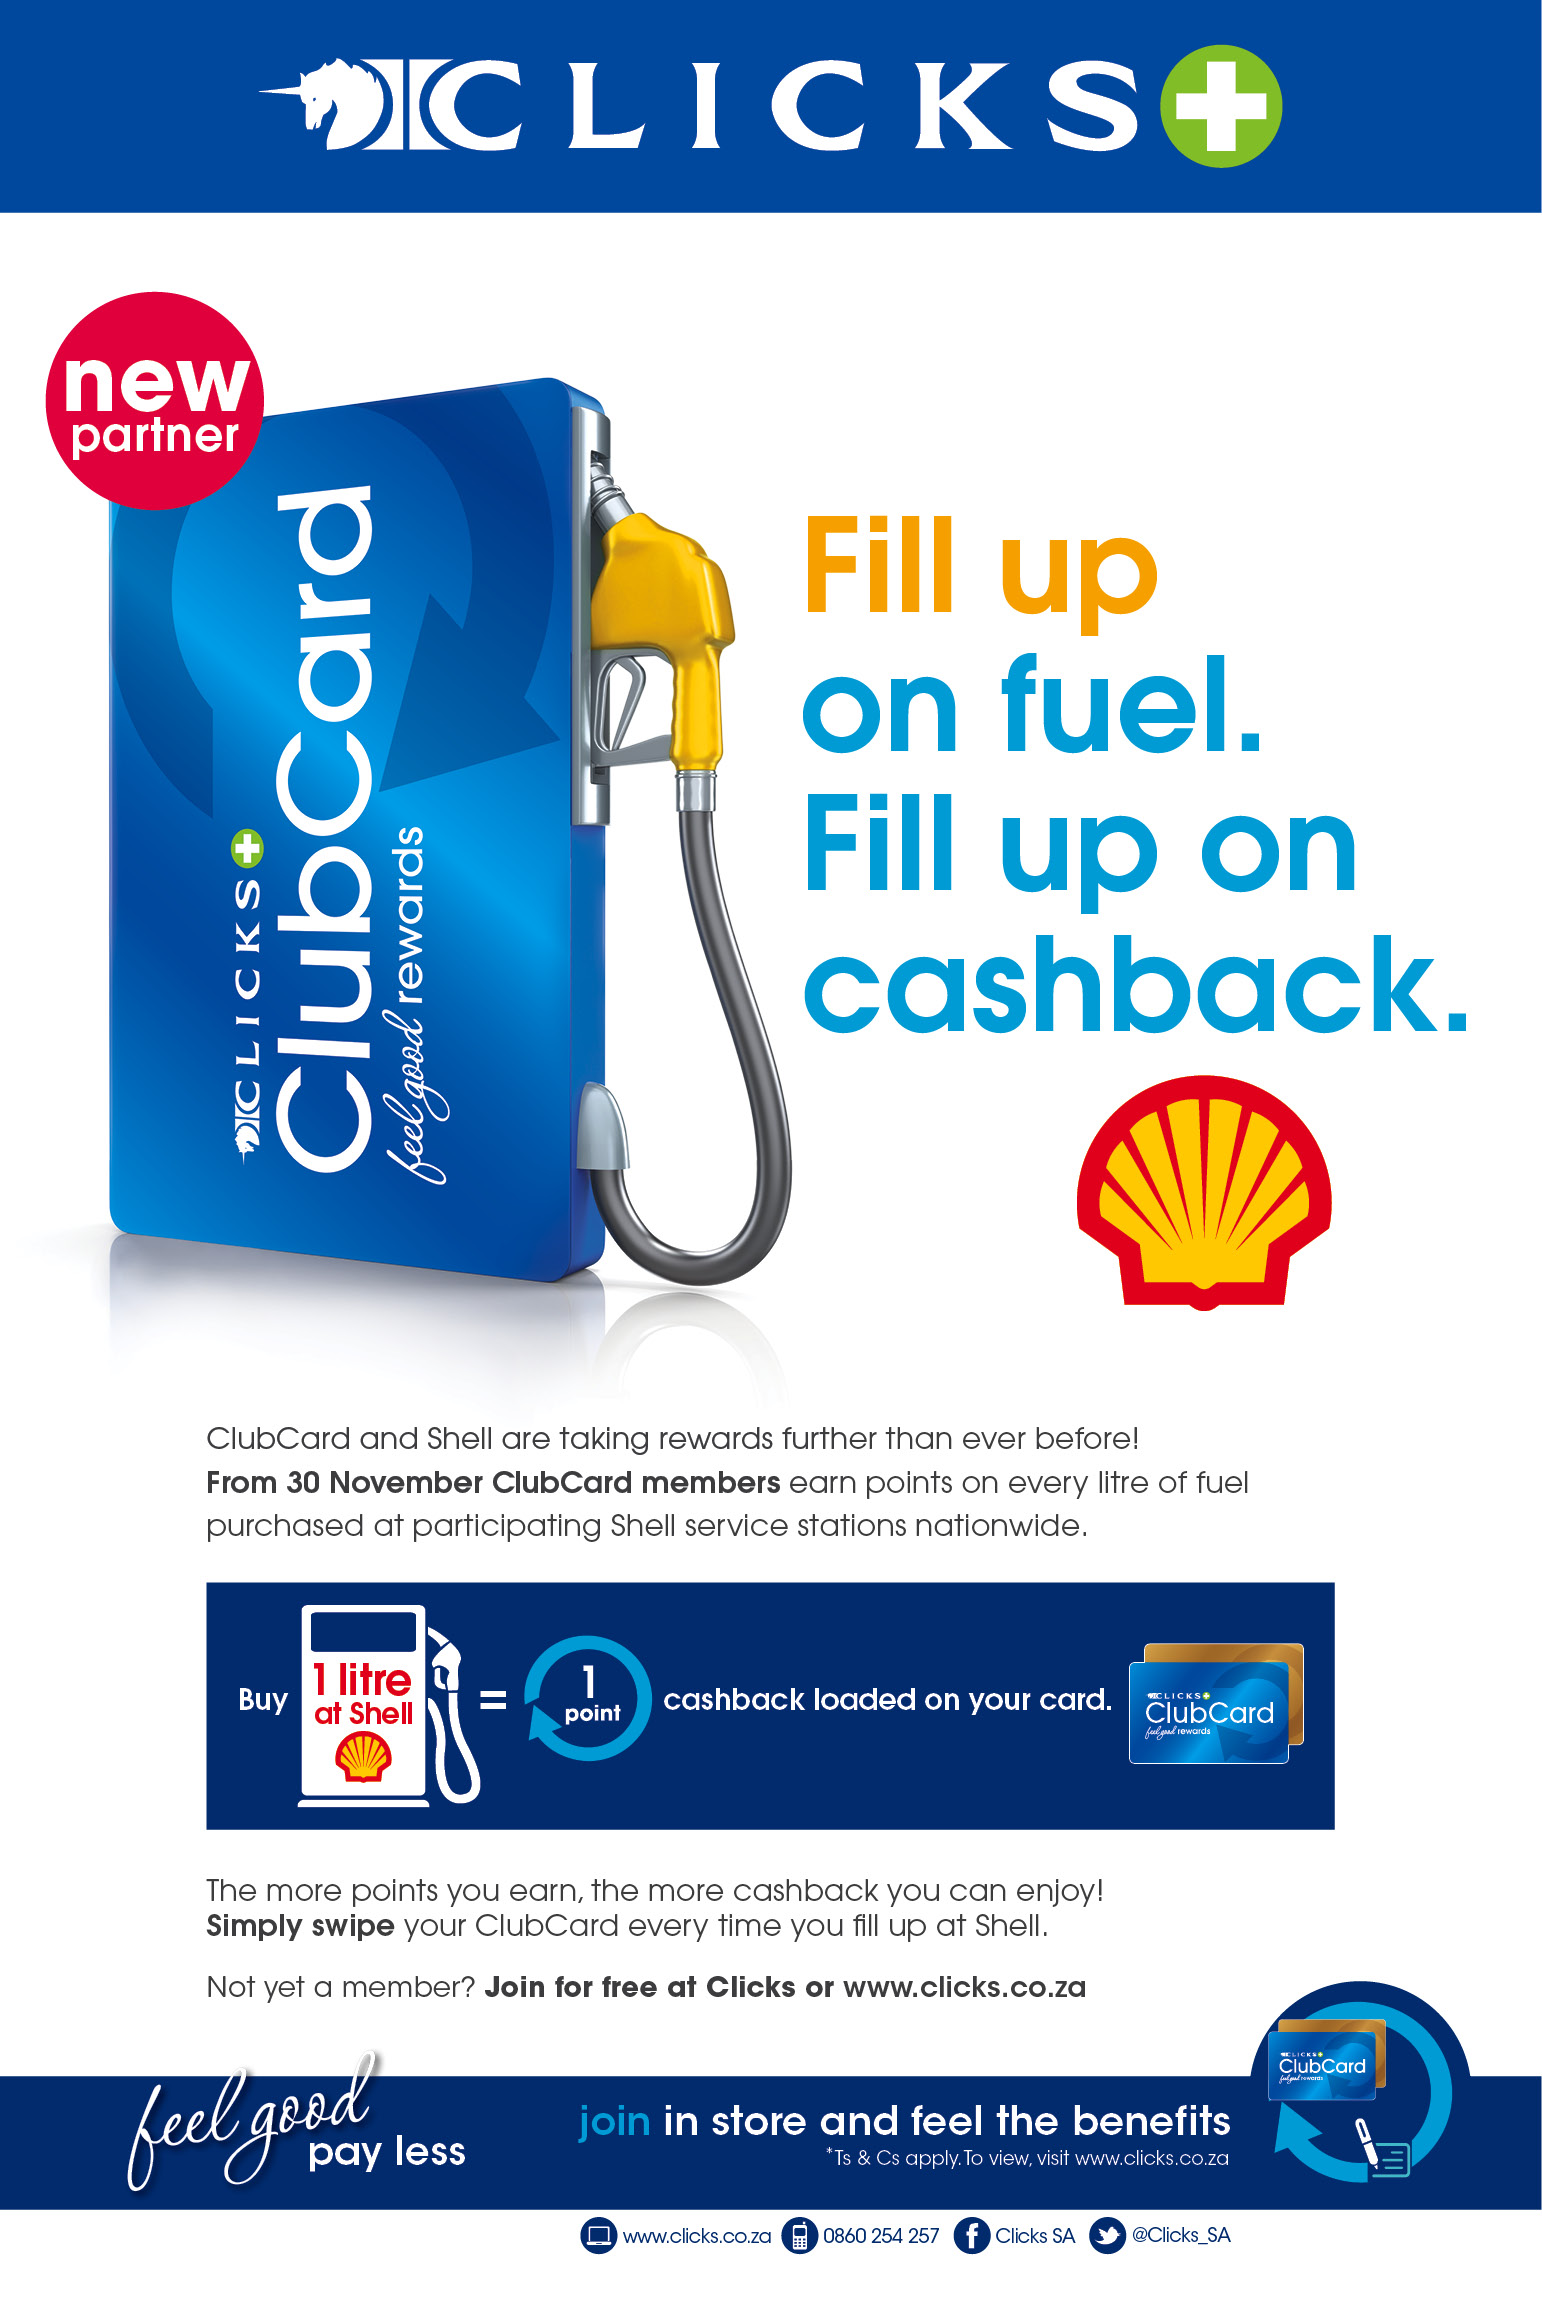 Clicks partners with Shell for a new loyalty programme